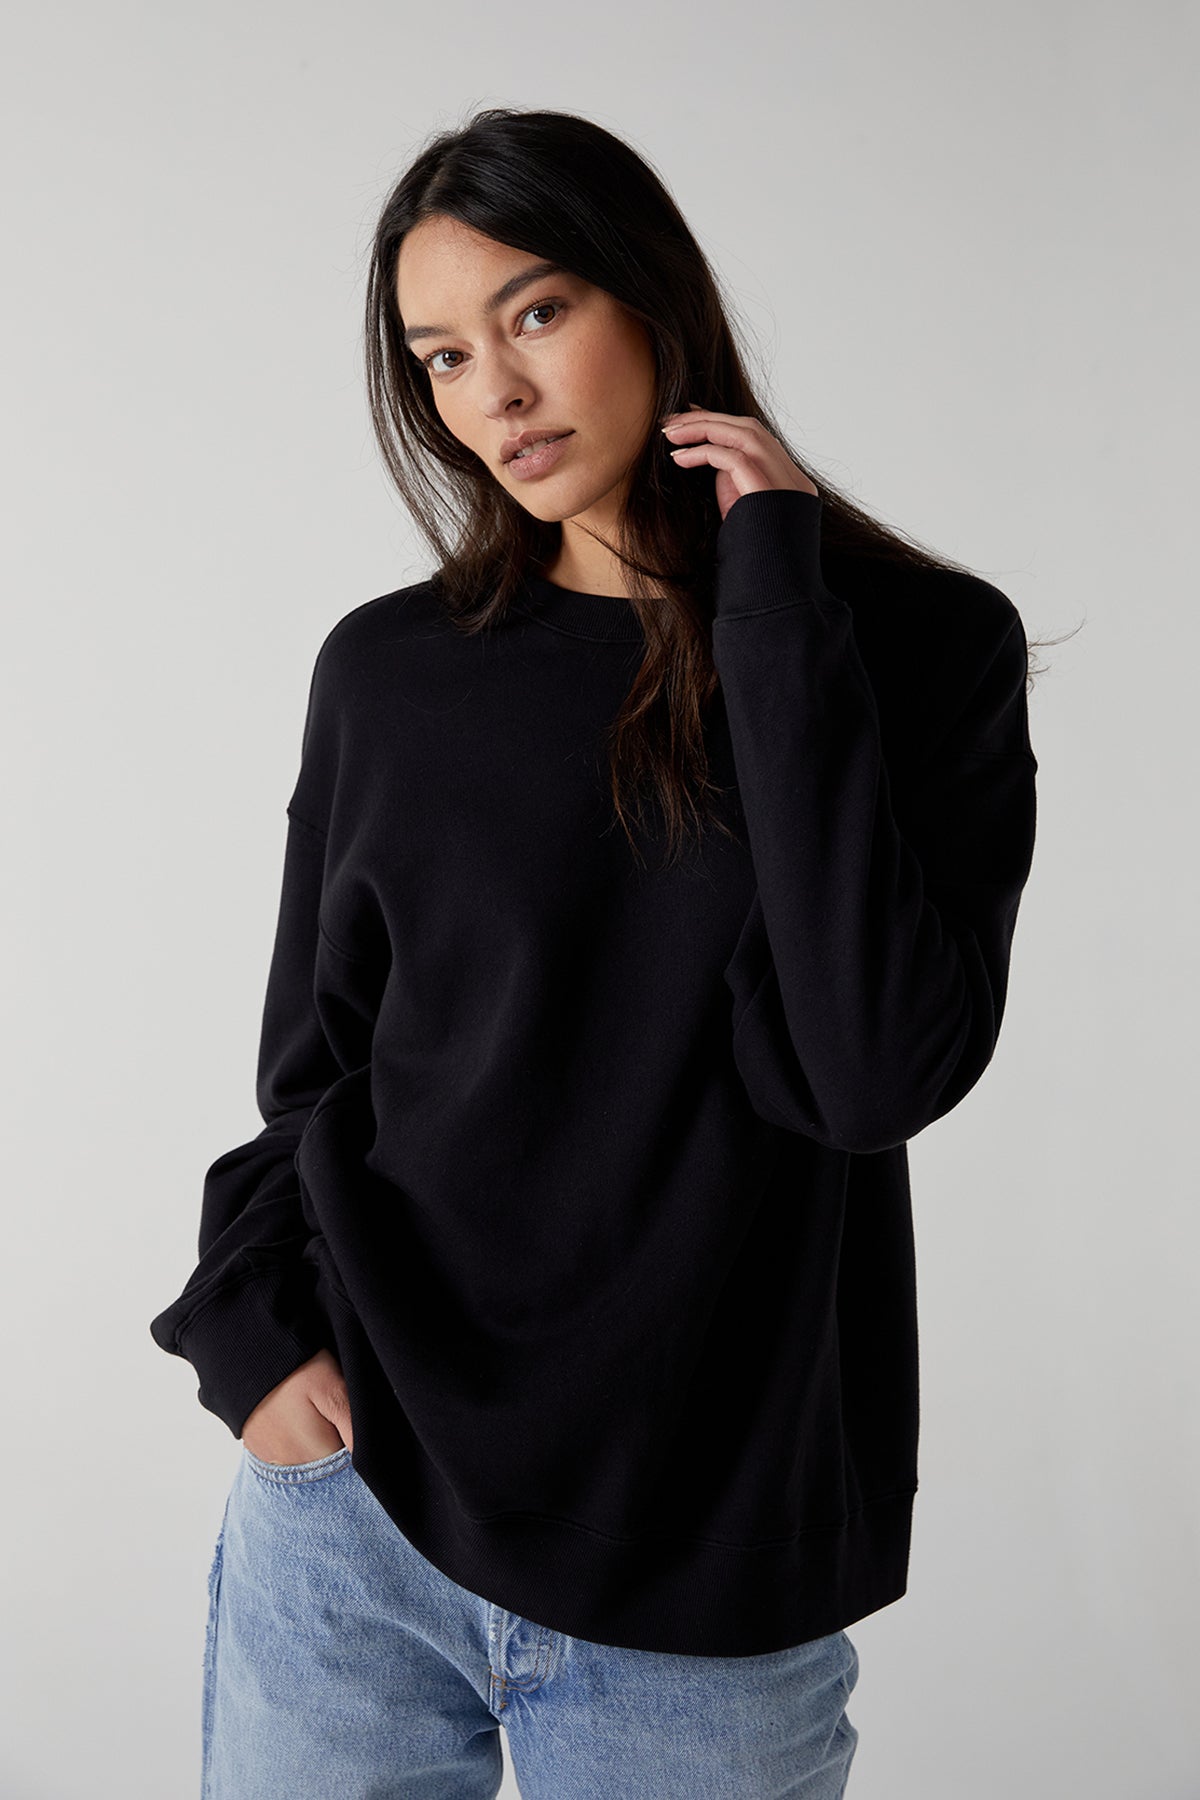 The model is wearing a black ABBOT SWEATSHIRT by Velvet by Jenny Graham and jeans.-25483445960897